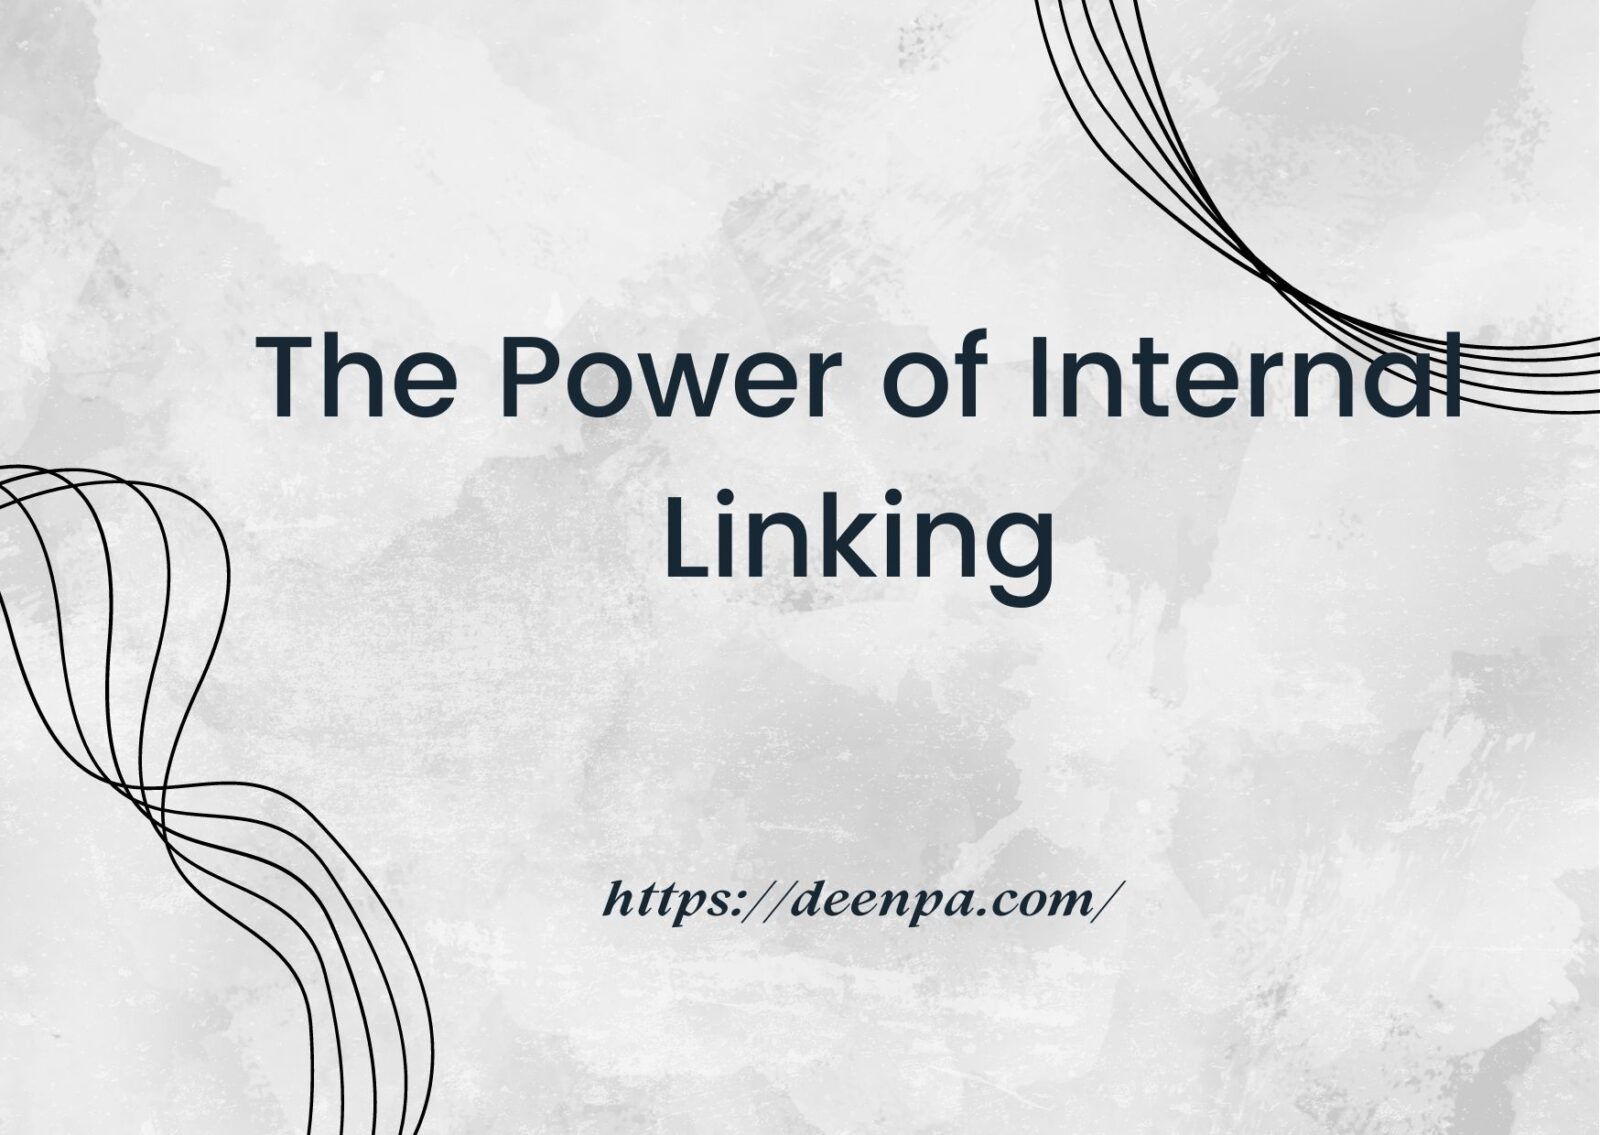 The Power of Internal Linking